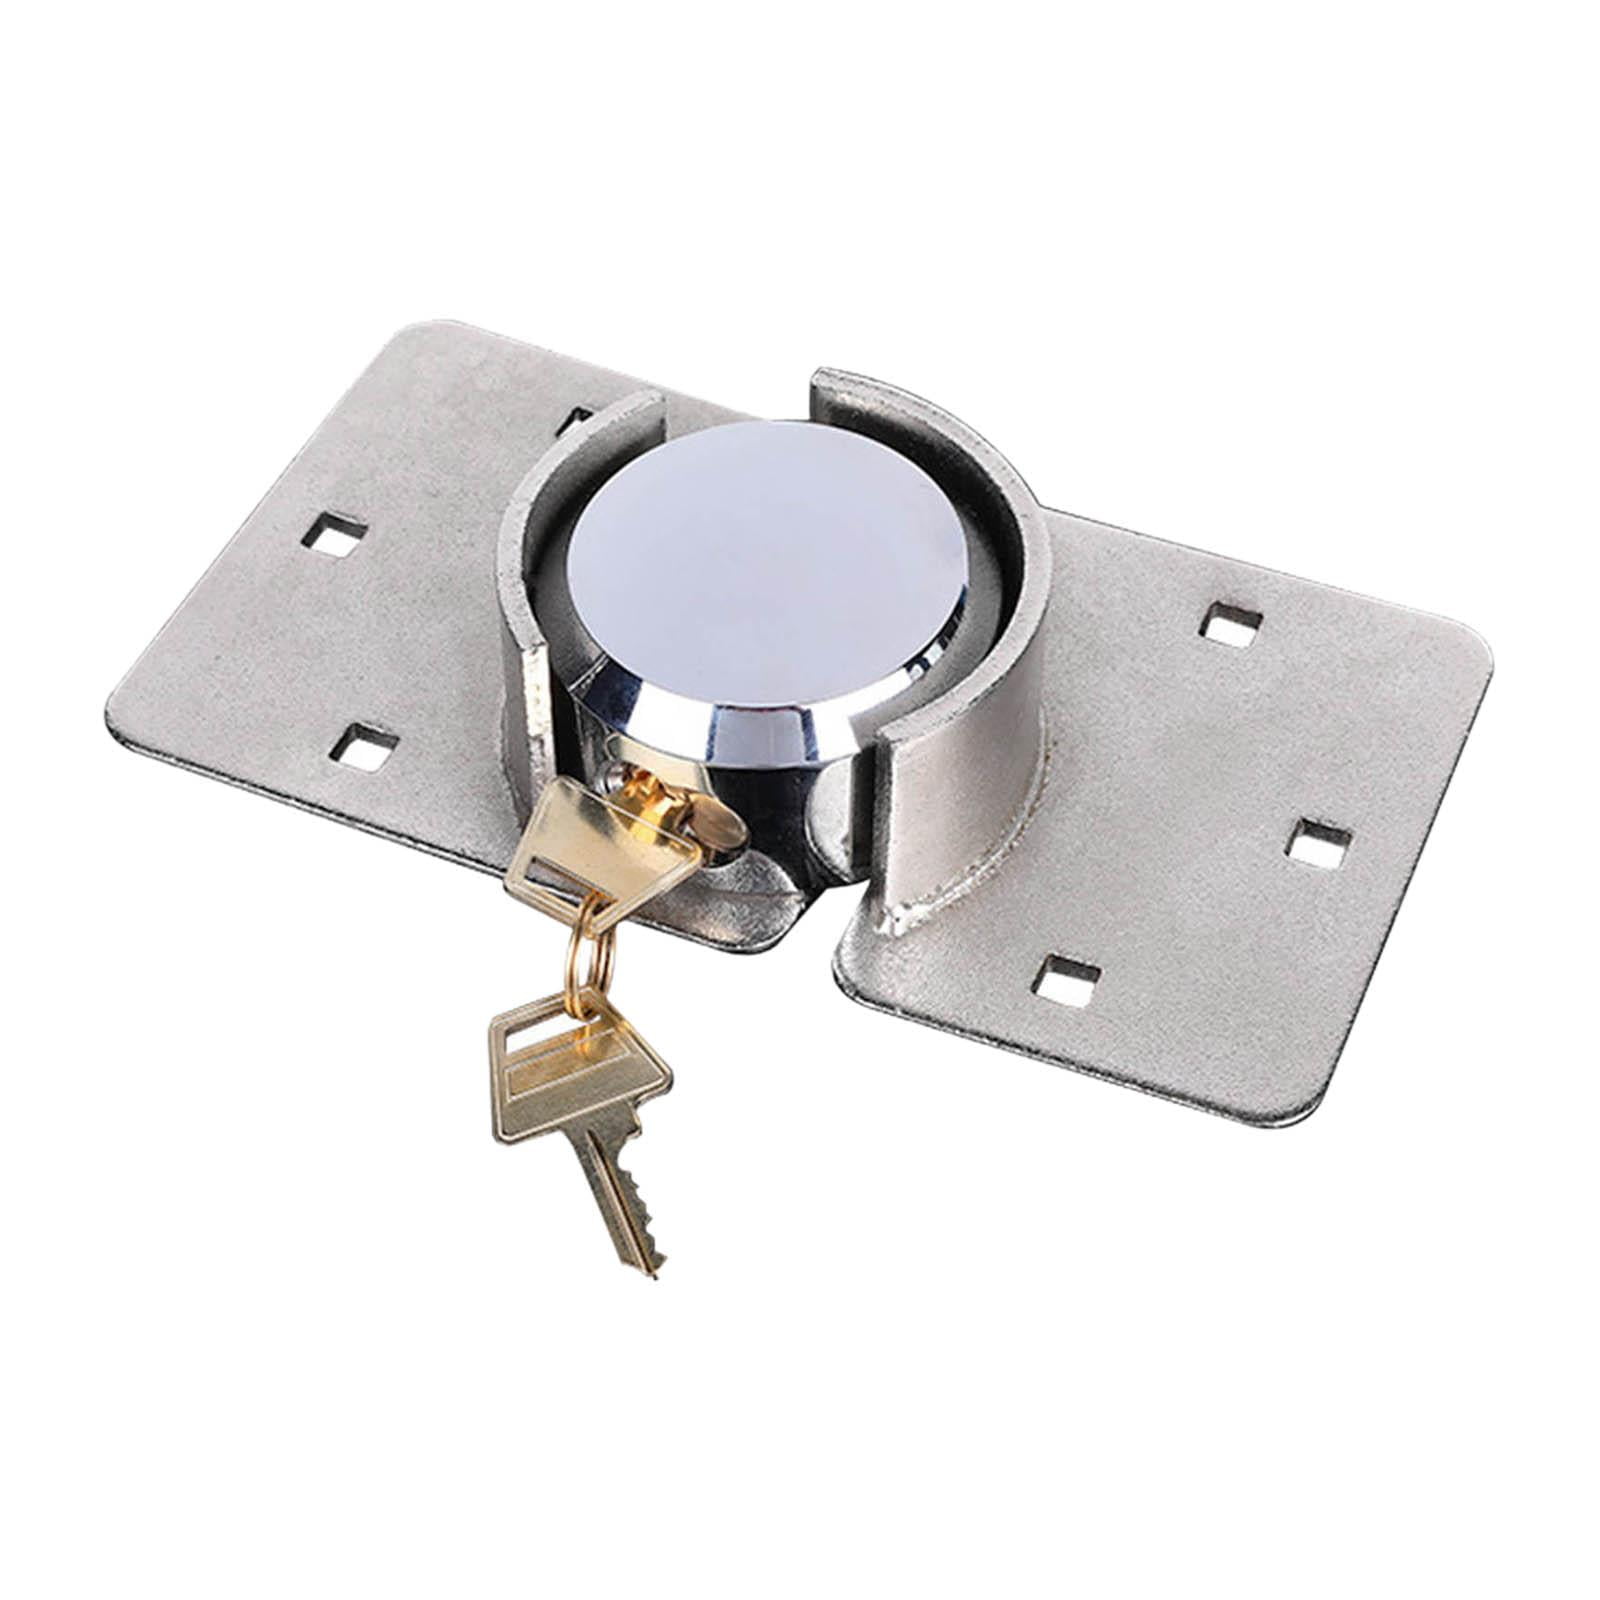 73MM HEAVY DUTY SHACKLESS PADLOCK AND HASP SET ROUND LOCK GATE SHED VAN SECURITY 